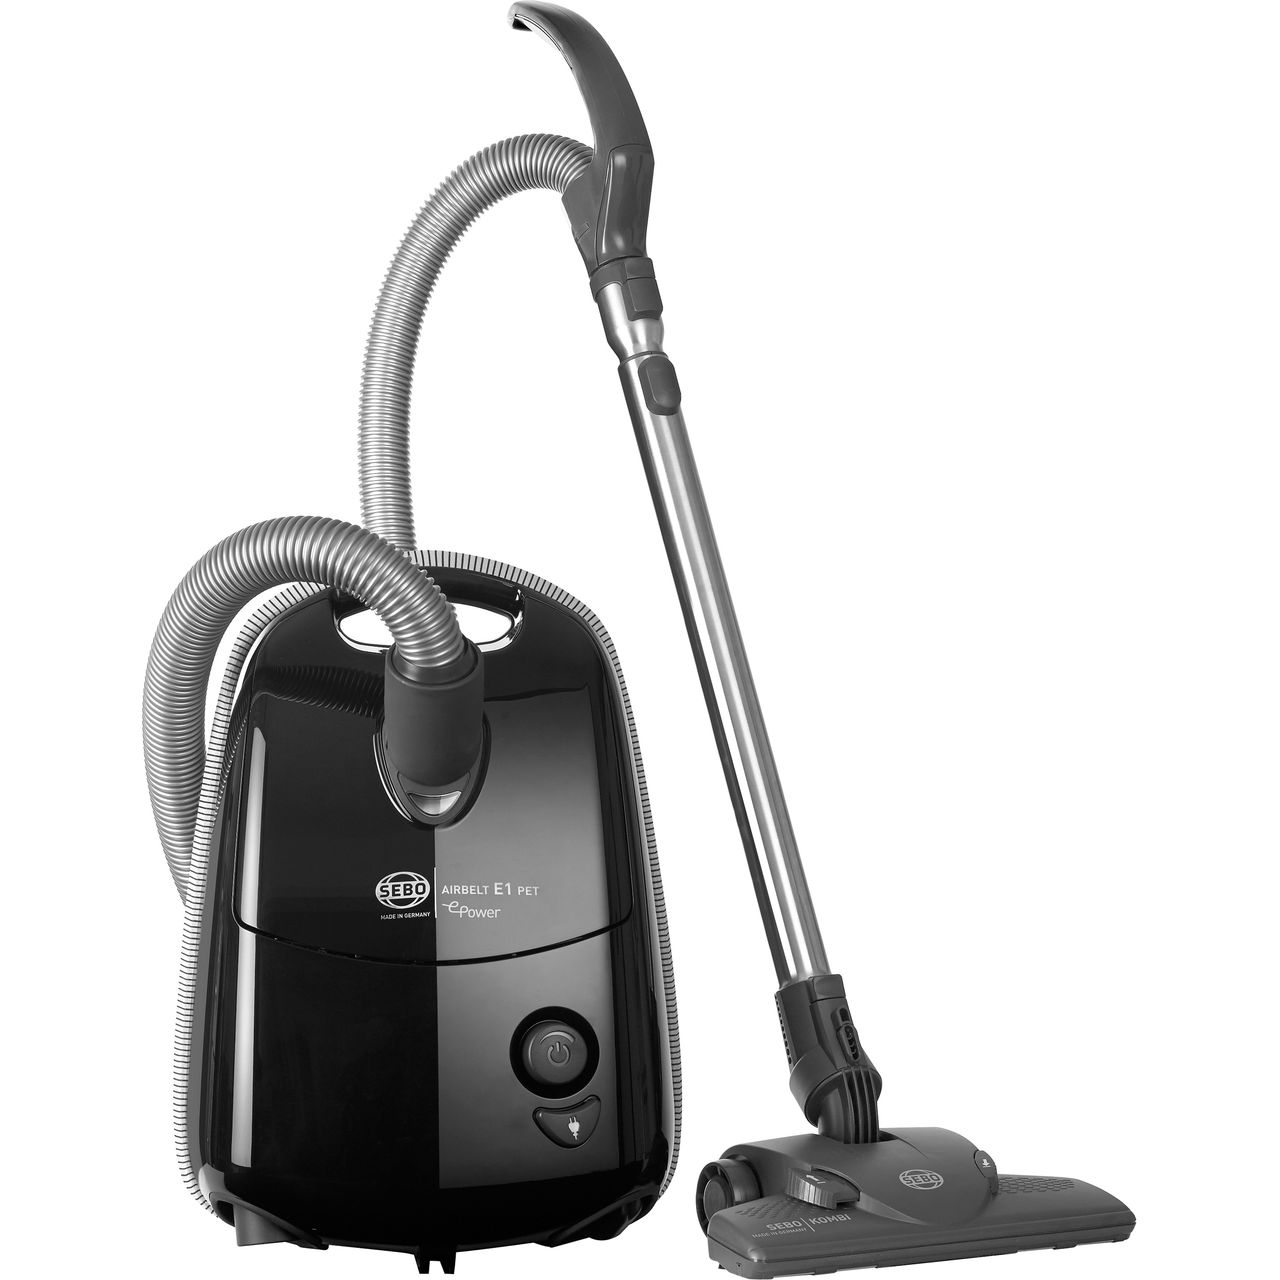 Sebo Airbelt E1 Pet ePower 92620GB Cylinder Vacuum Cleaner Review